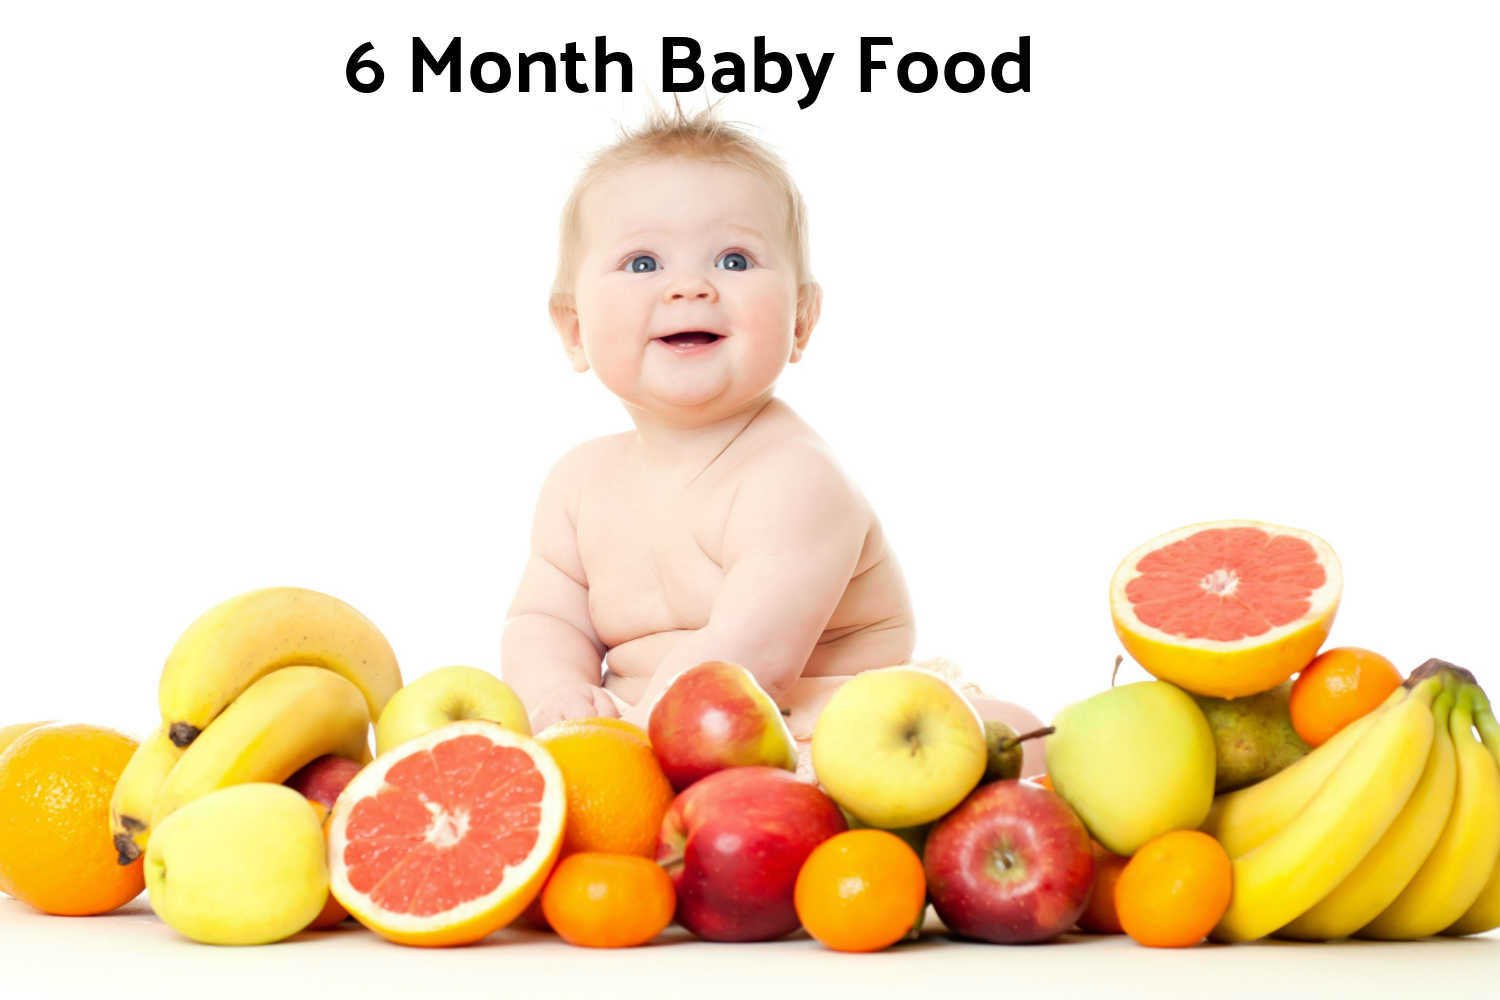 6 Month Baby Food - What to Give, What Not to Give and Sample Schedule ...